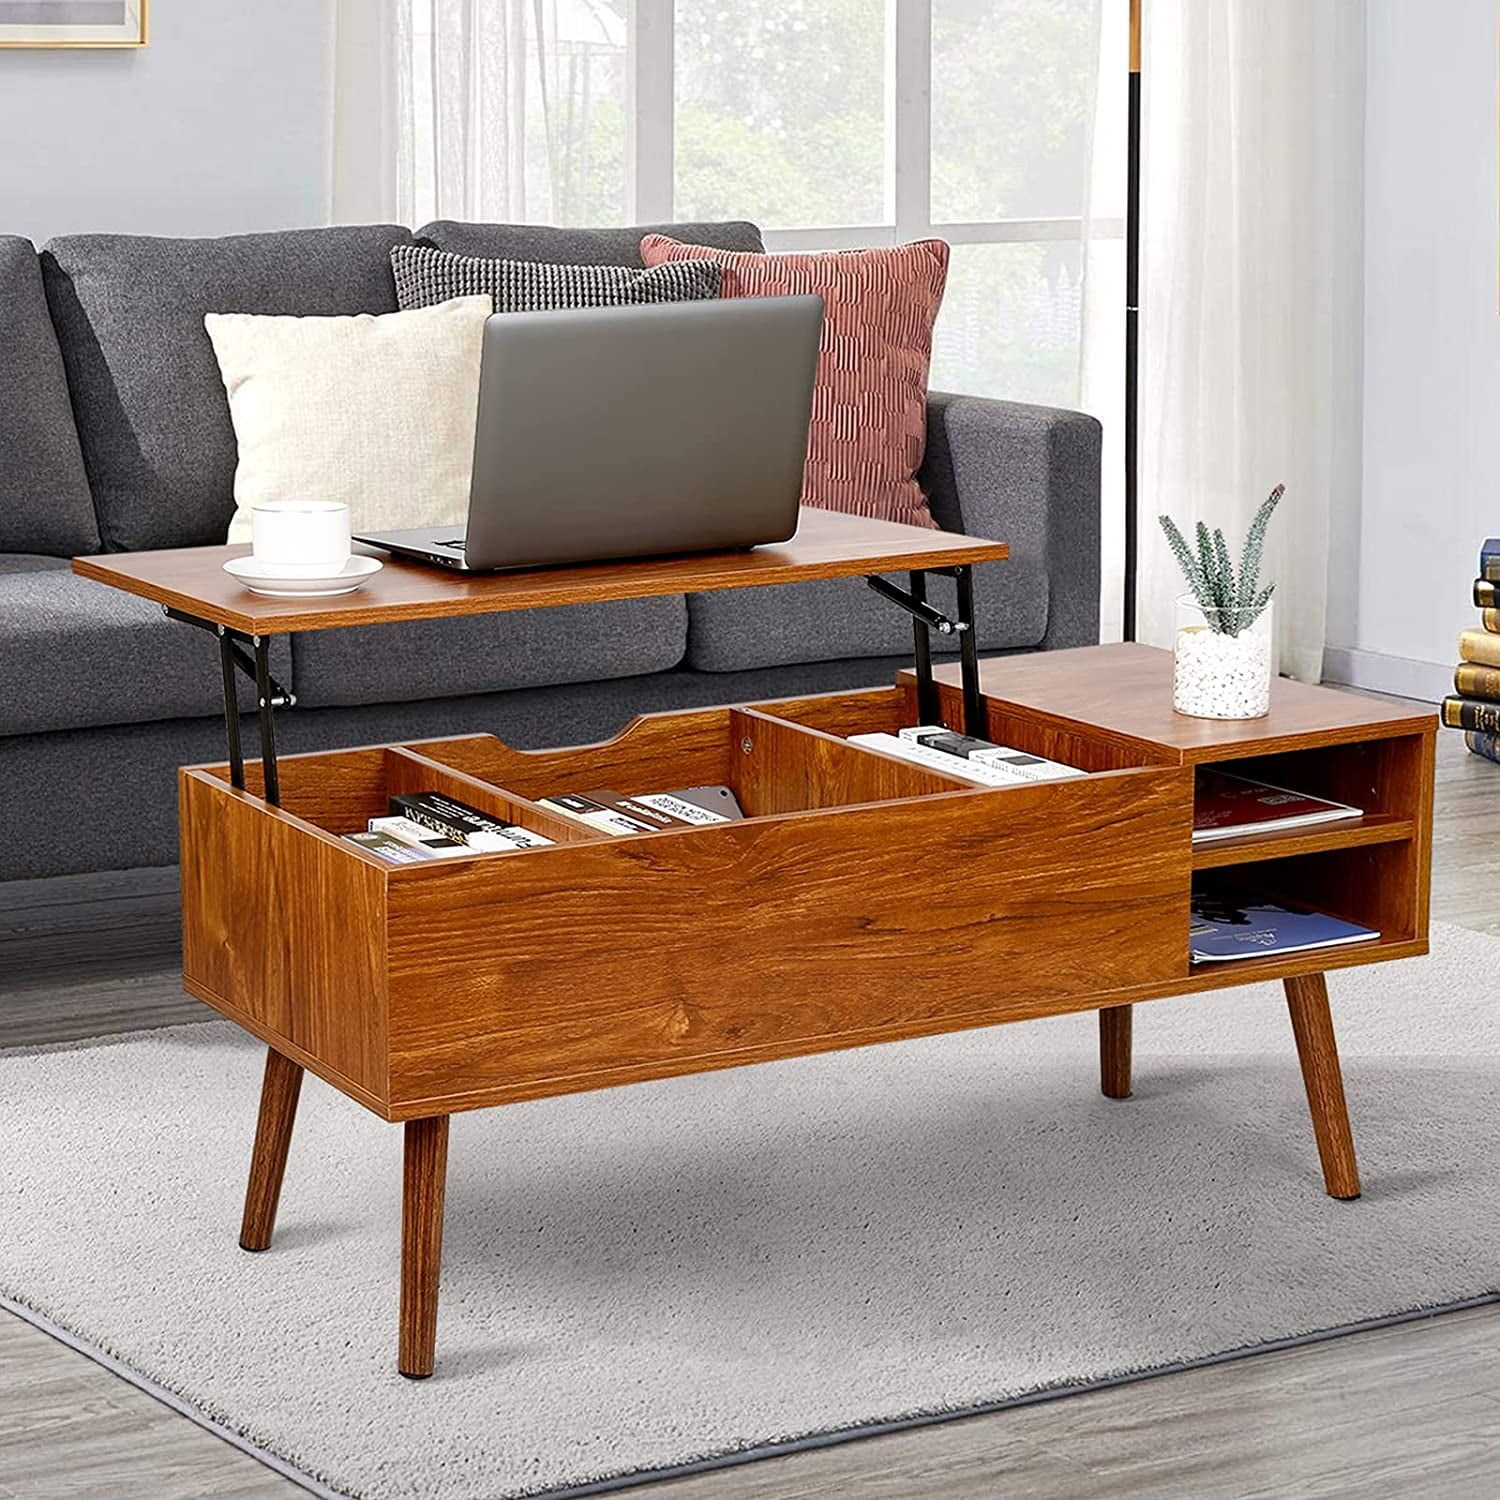 Modern Lift Top Coffee Table With Hidden Compartment Storage,adjustable Regarding Modern Wooden Lift Top Tables (View 3 of 20)